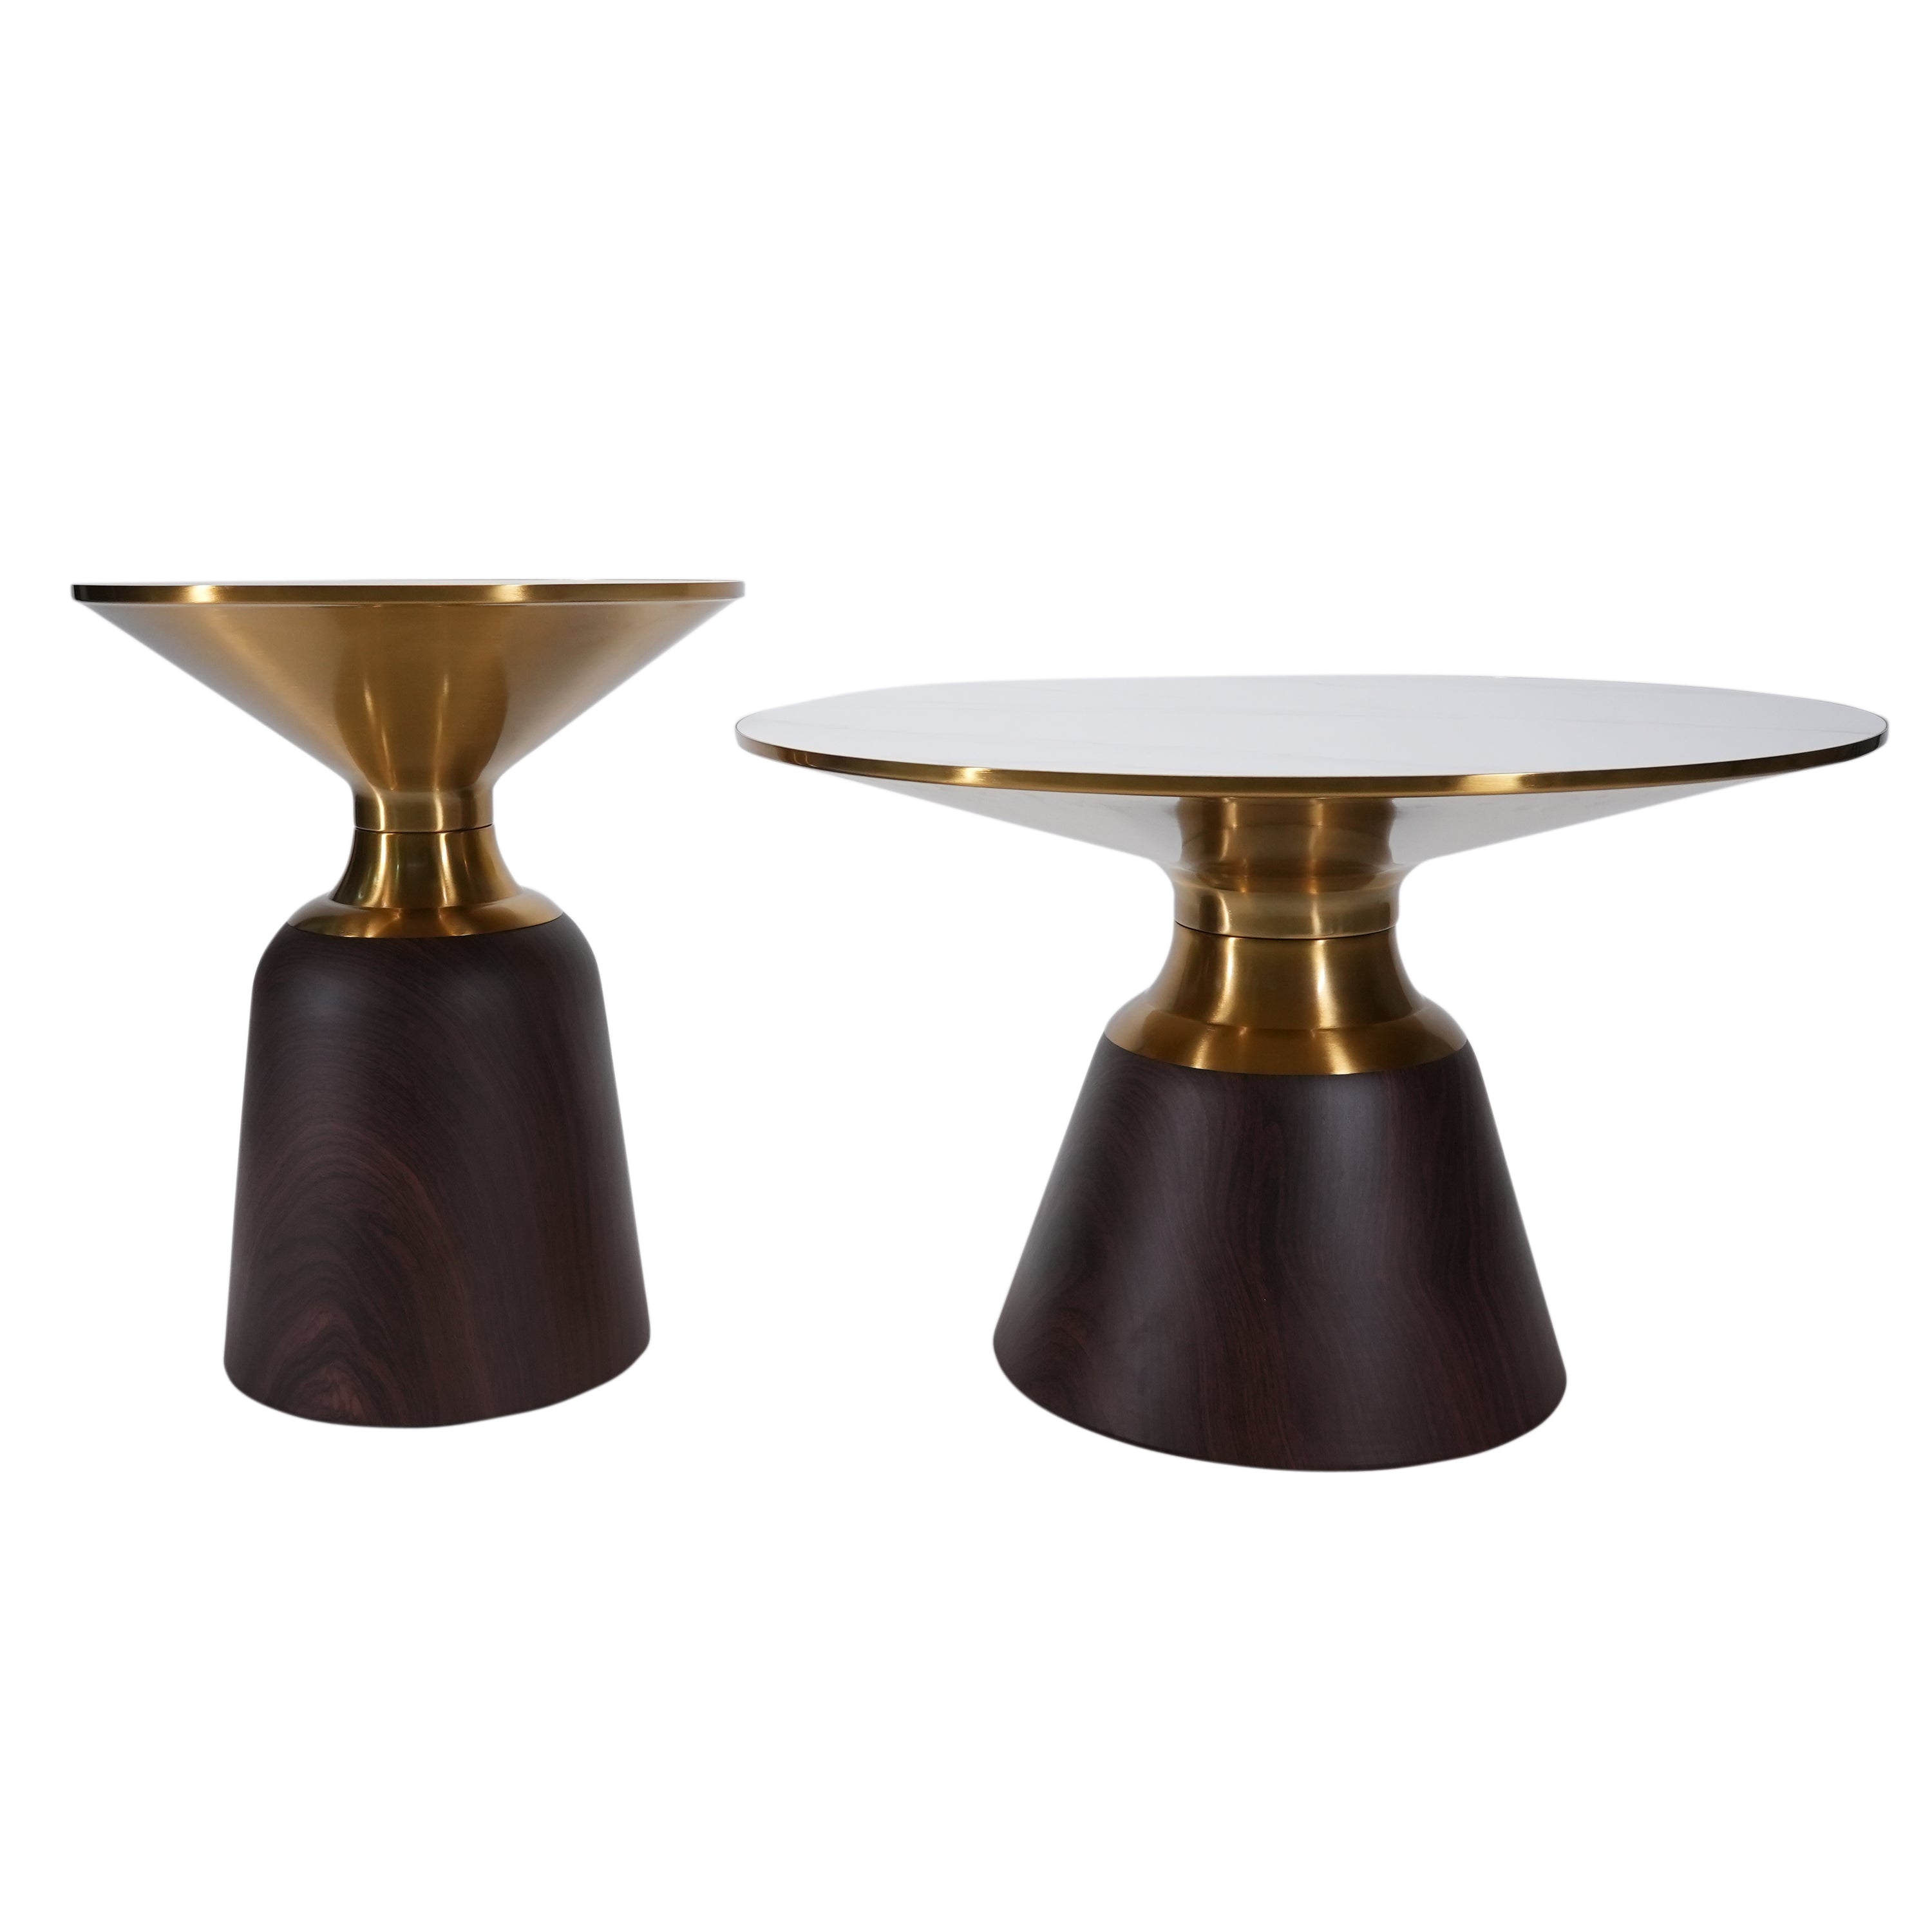 Avior Small Modern Round Side Table With Marble Top and Metal Base for Living Room, Bedroom, Sofa and Couch - Brown